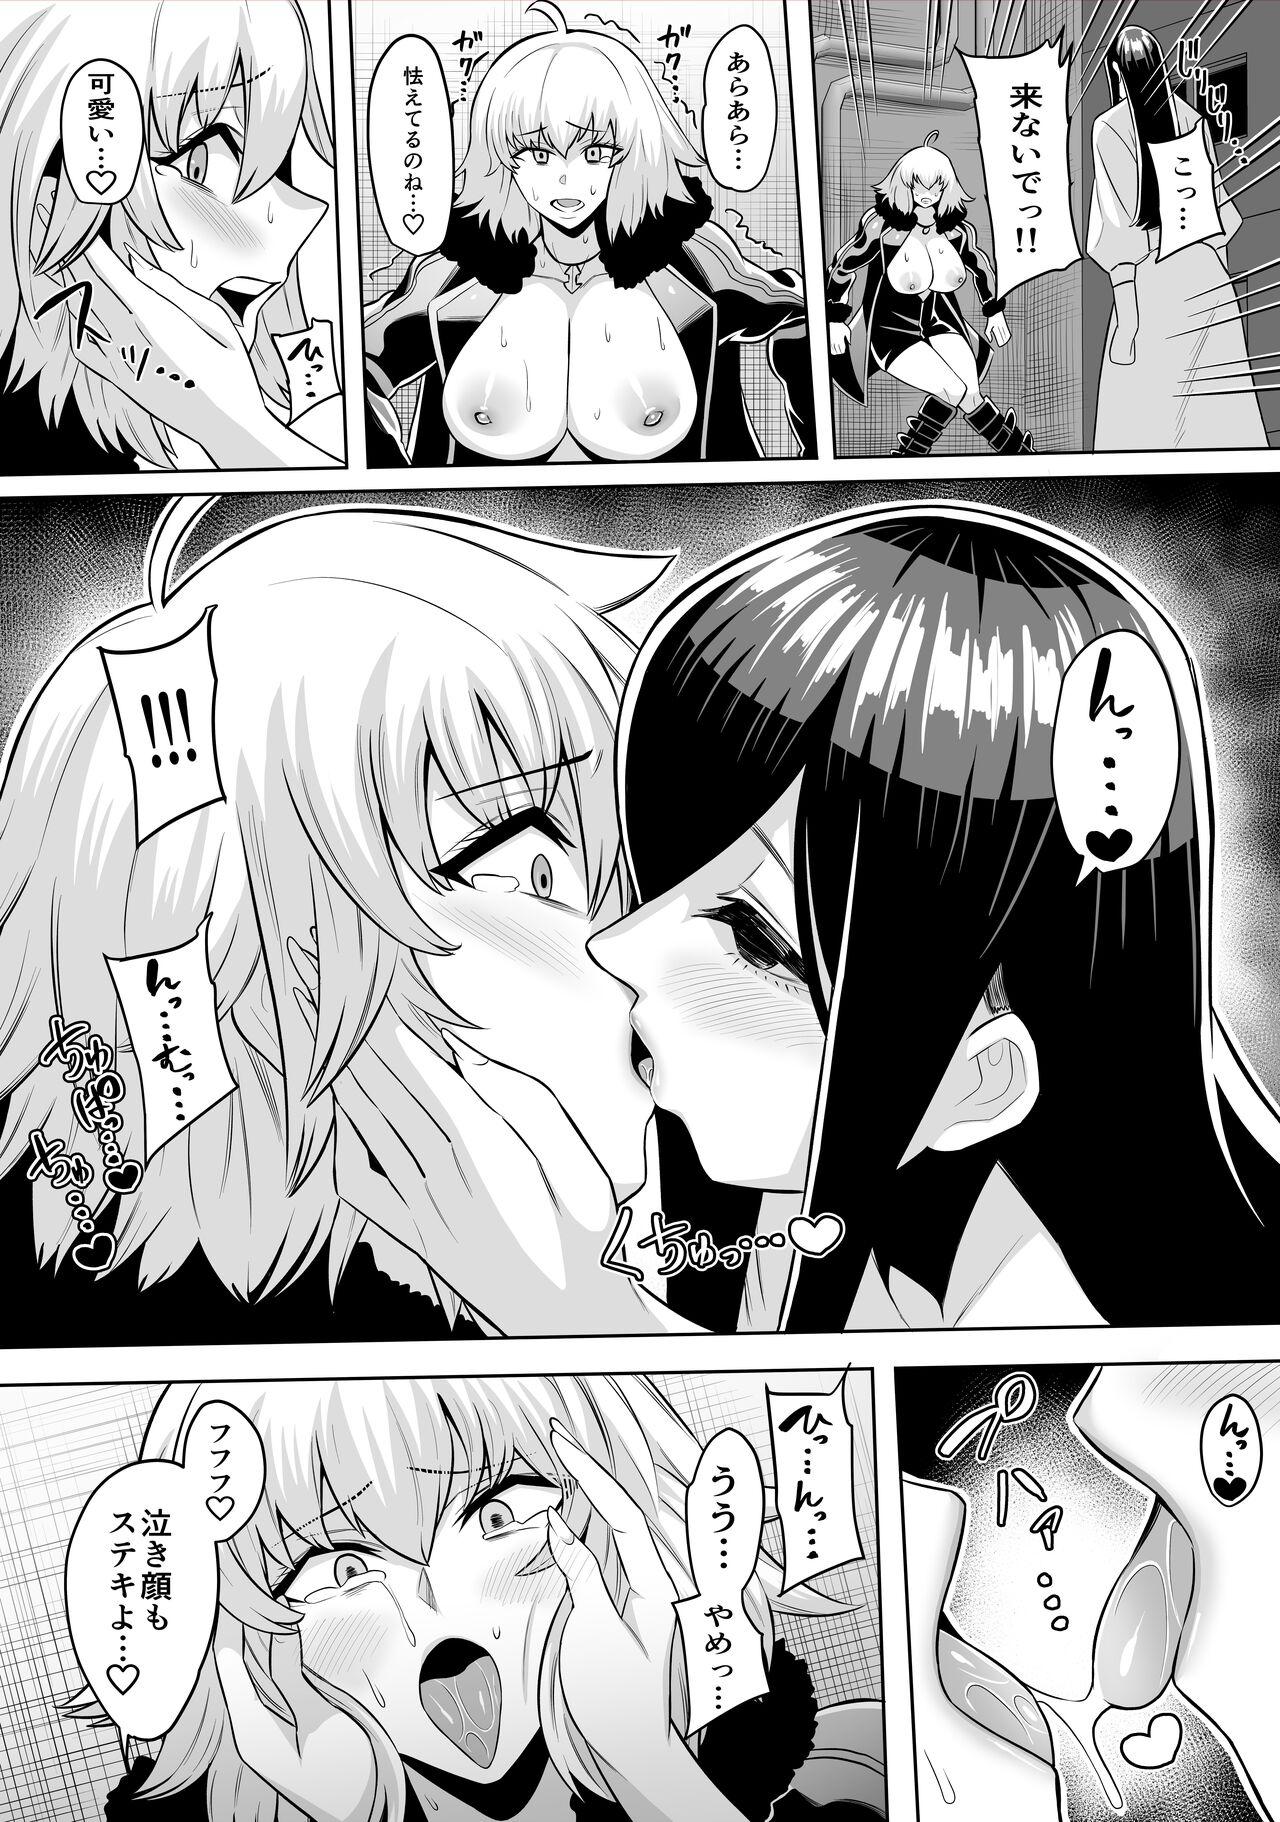 Sis ジャンヌオルタ - Fate grand order Sologirl - Page 8